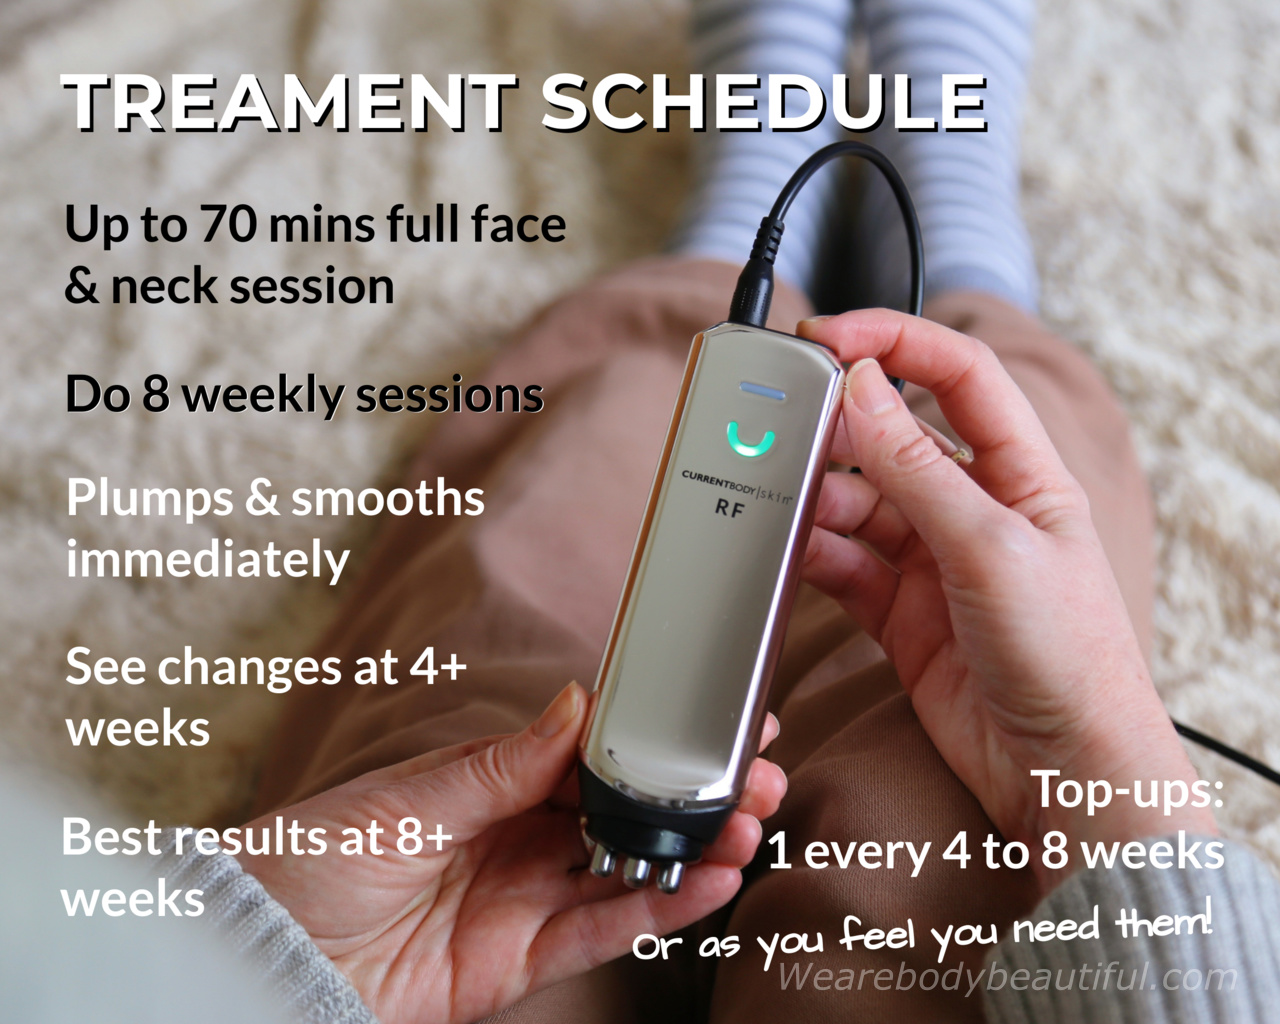 The CurrentBody Skin RF treatment schedule is up to 70 mins full face & neck. Do 8 weekly sessions. Each session leaves your skin plump & smooth. See changes at 4+ weeks and your best results at 8+ weeks. Then do top-ups every 4 to 8 weeks (or more frequently if you feel you need them!)